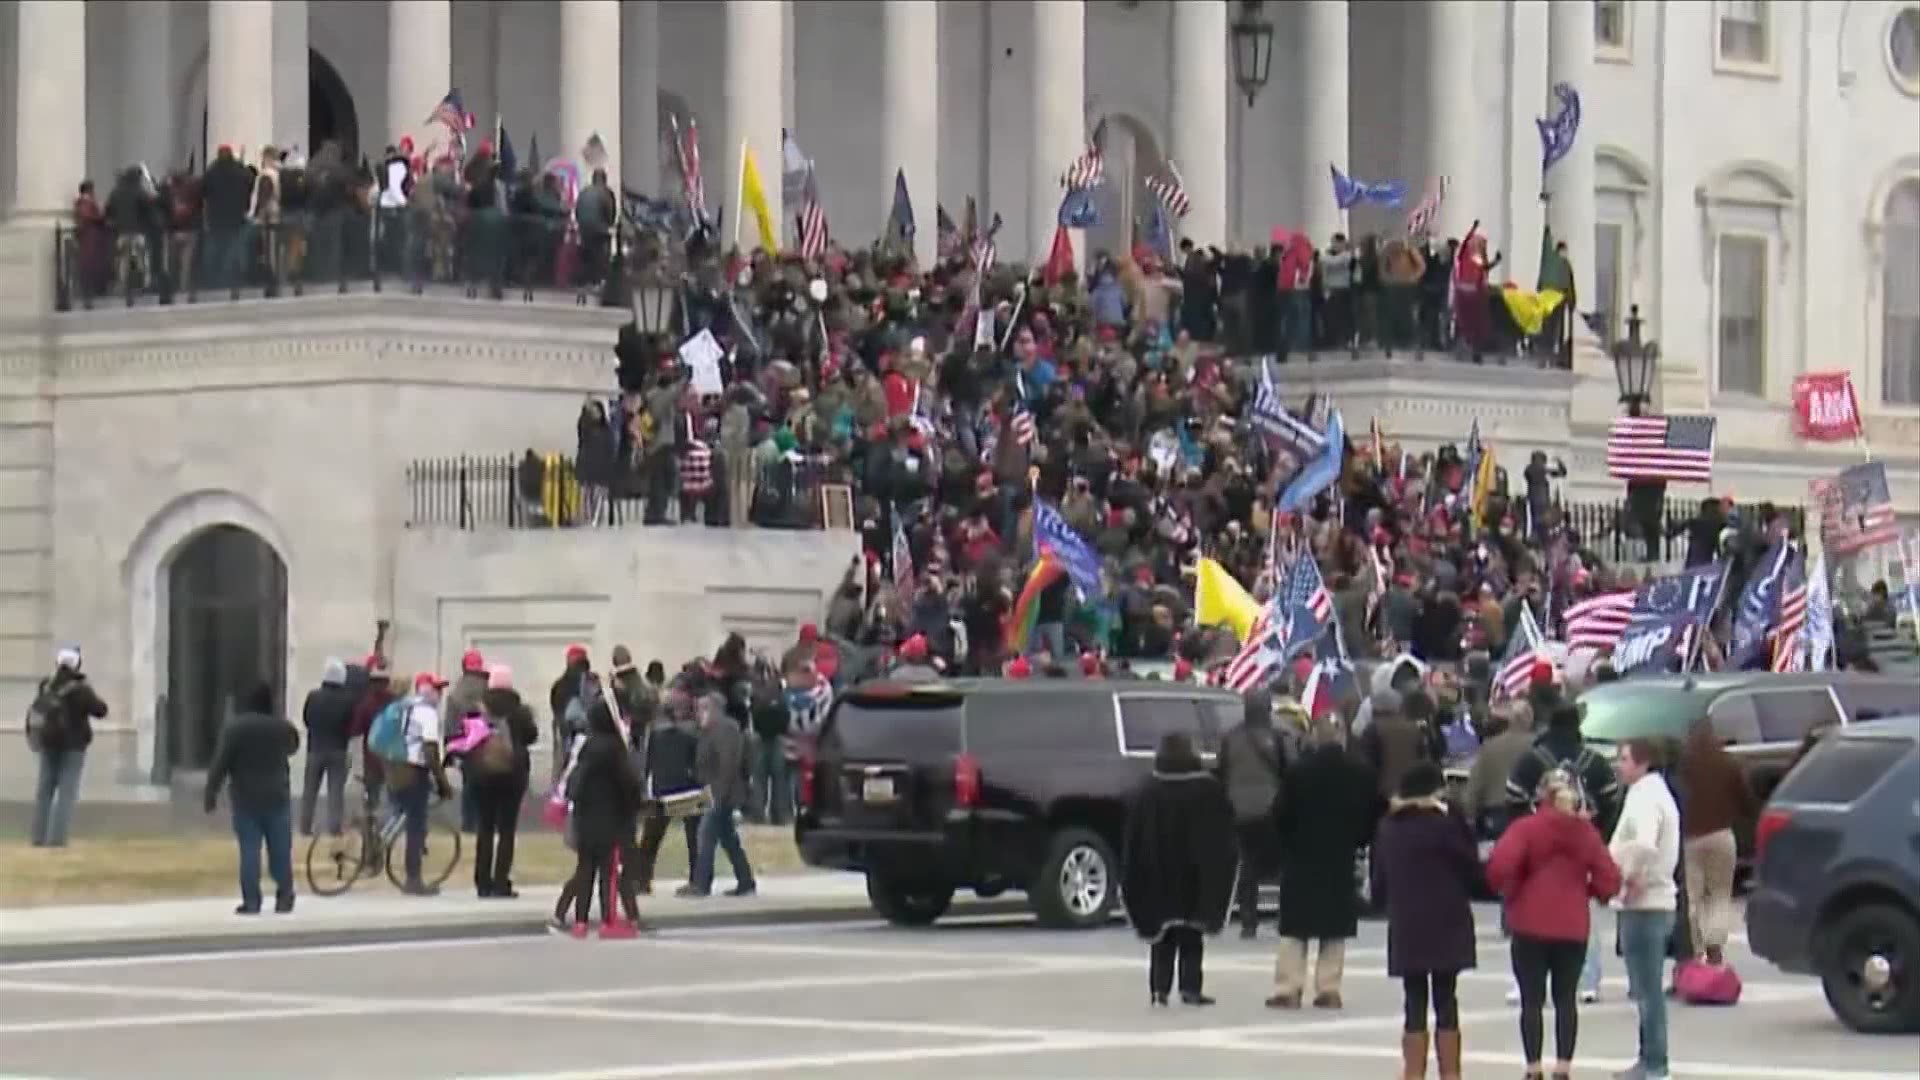 Many are calling for Trump to be removed from office after the riot at the U.S. Capitol